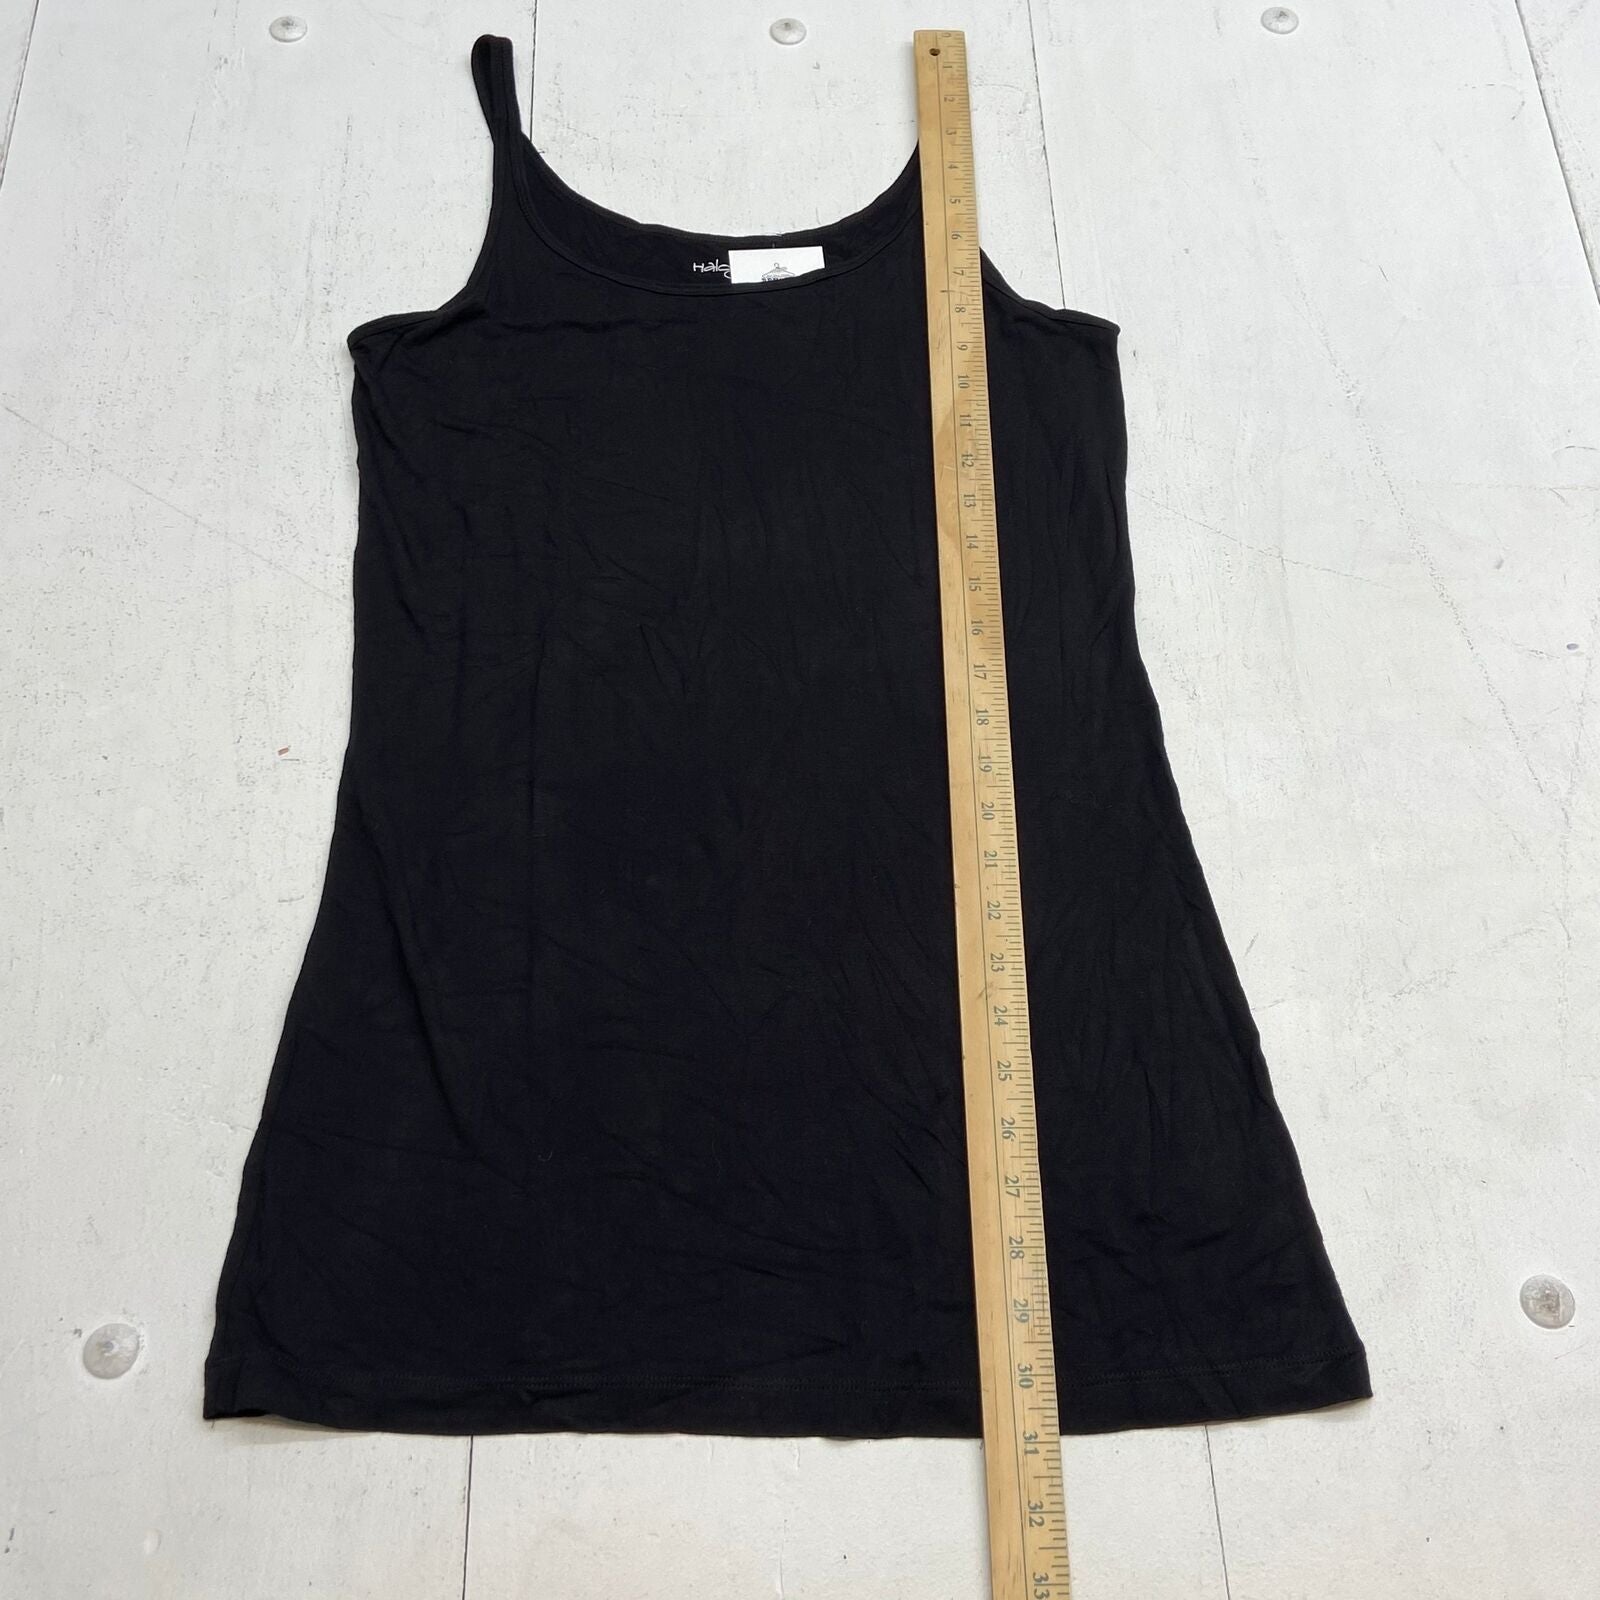 Halogen Black Sleeveless Fitted Cami Tank Top Women Size XL